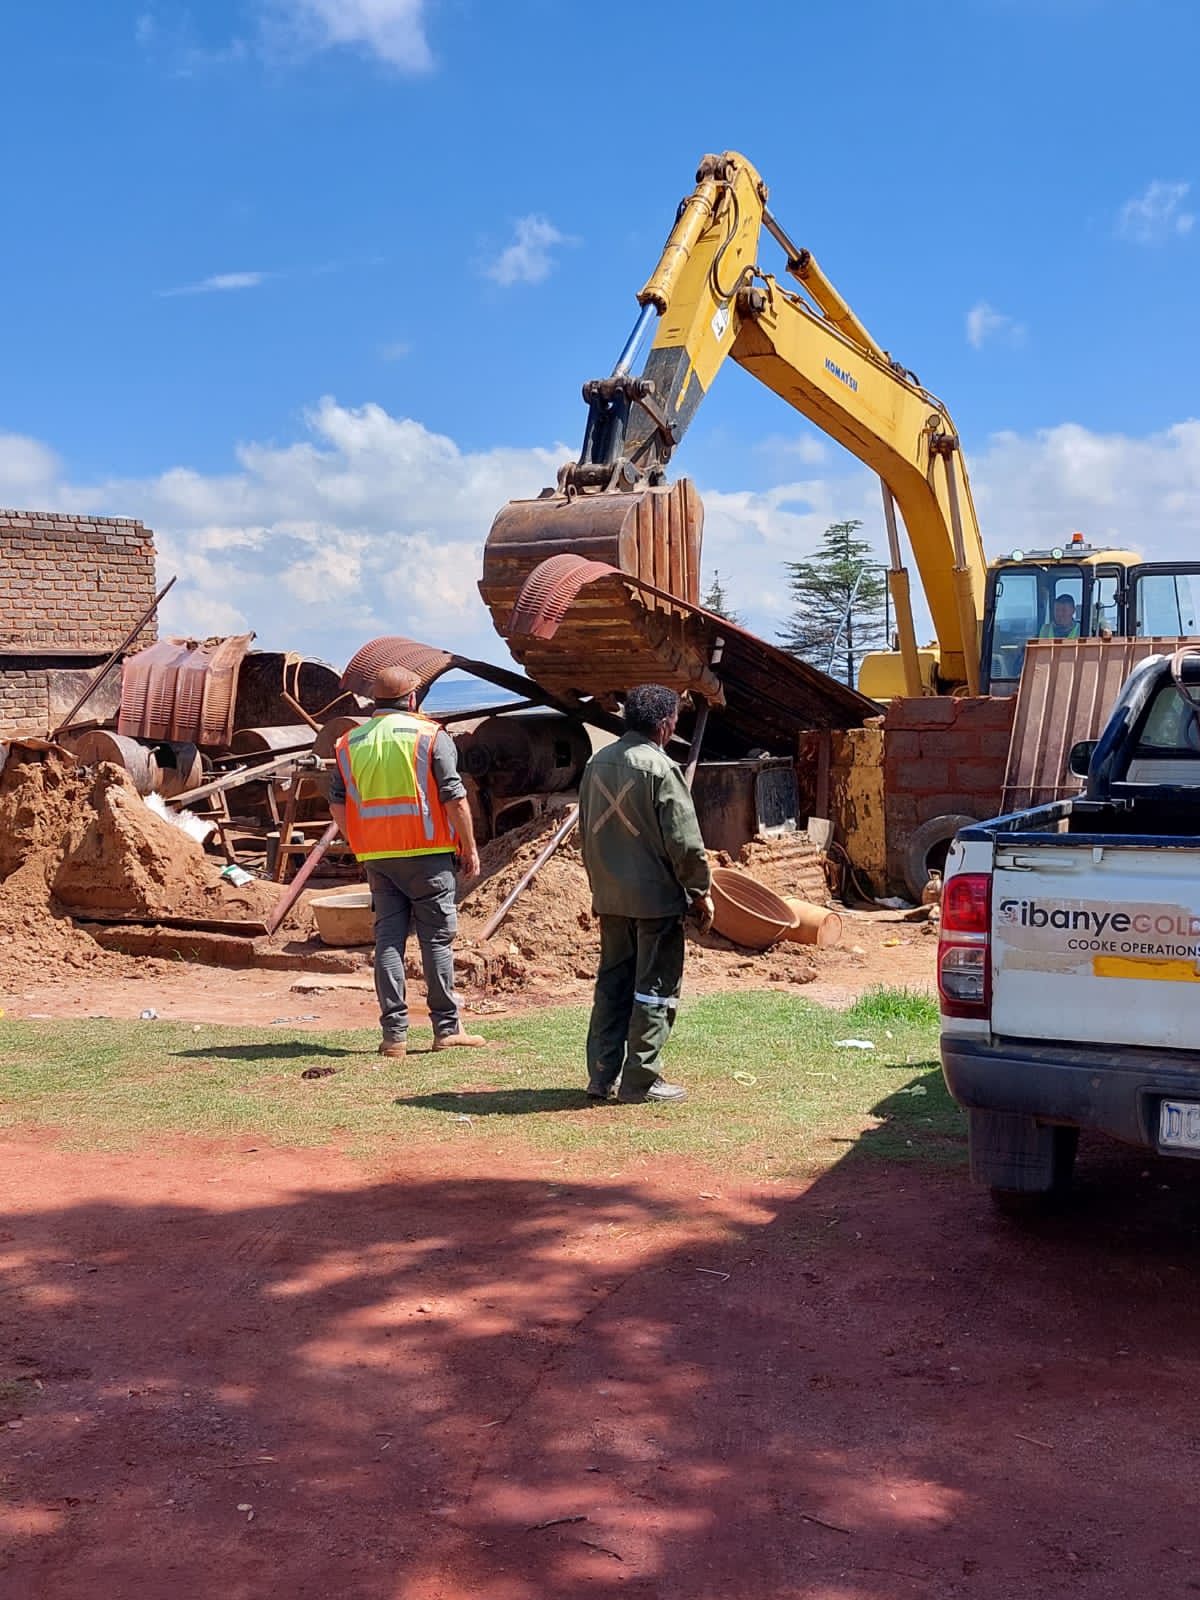 HAWKS DISMANTLE APPROXIMATELY R2 MILLION WORTH OF CLANDISTINE GOLD REFINERY